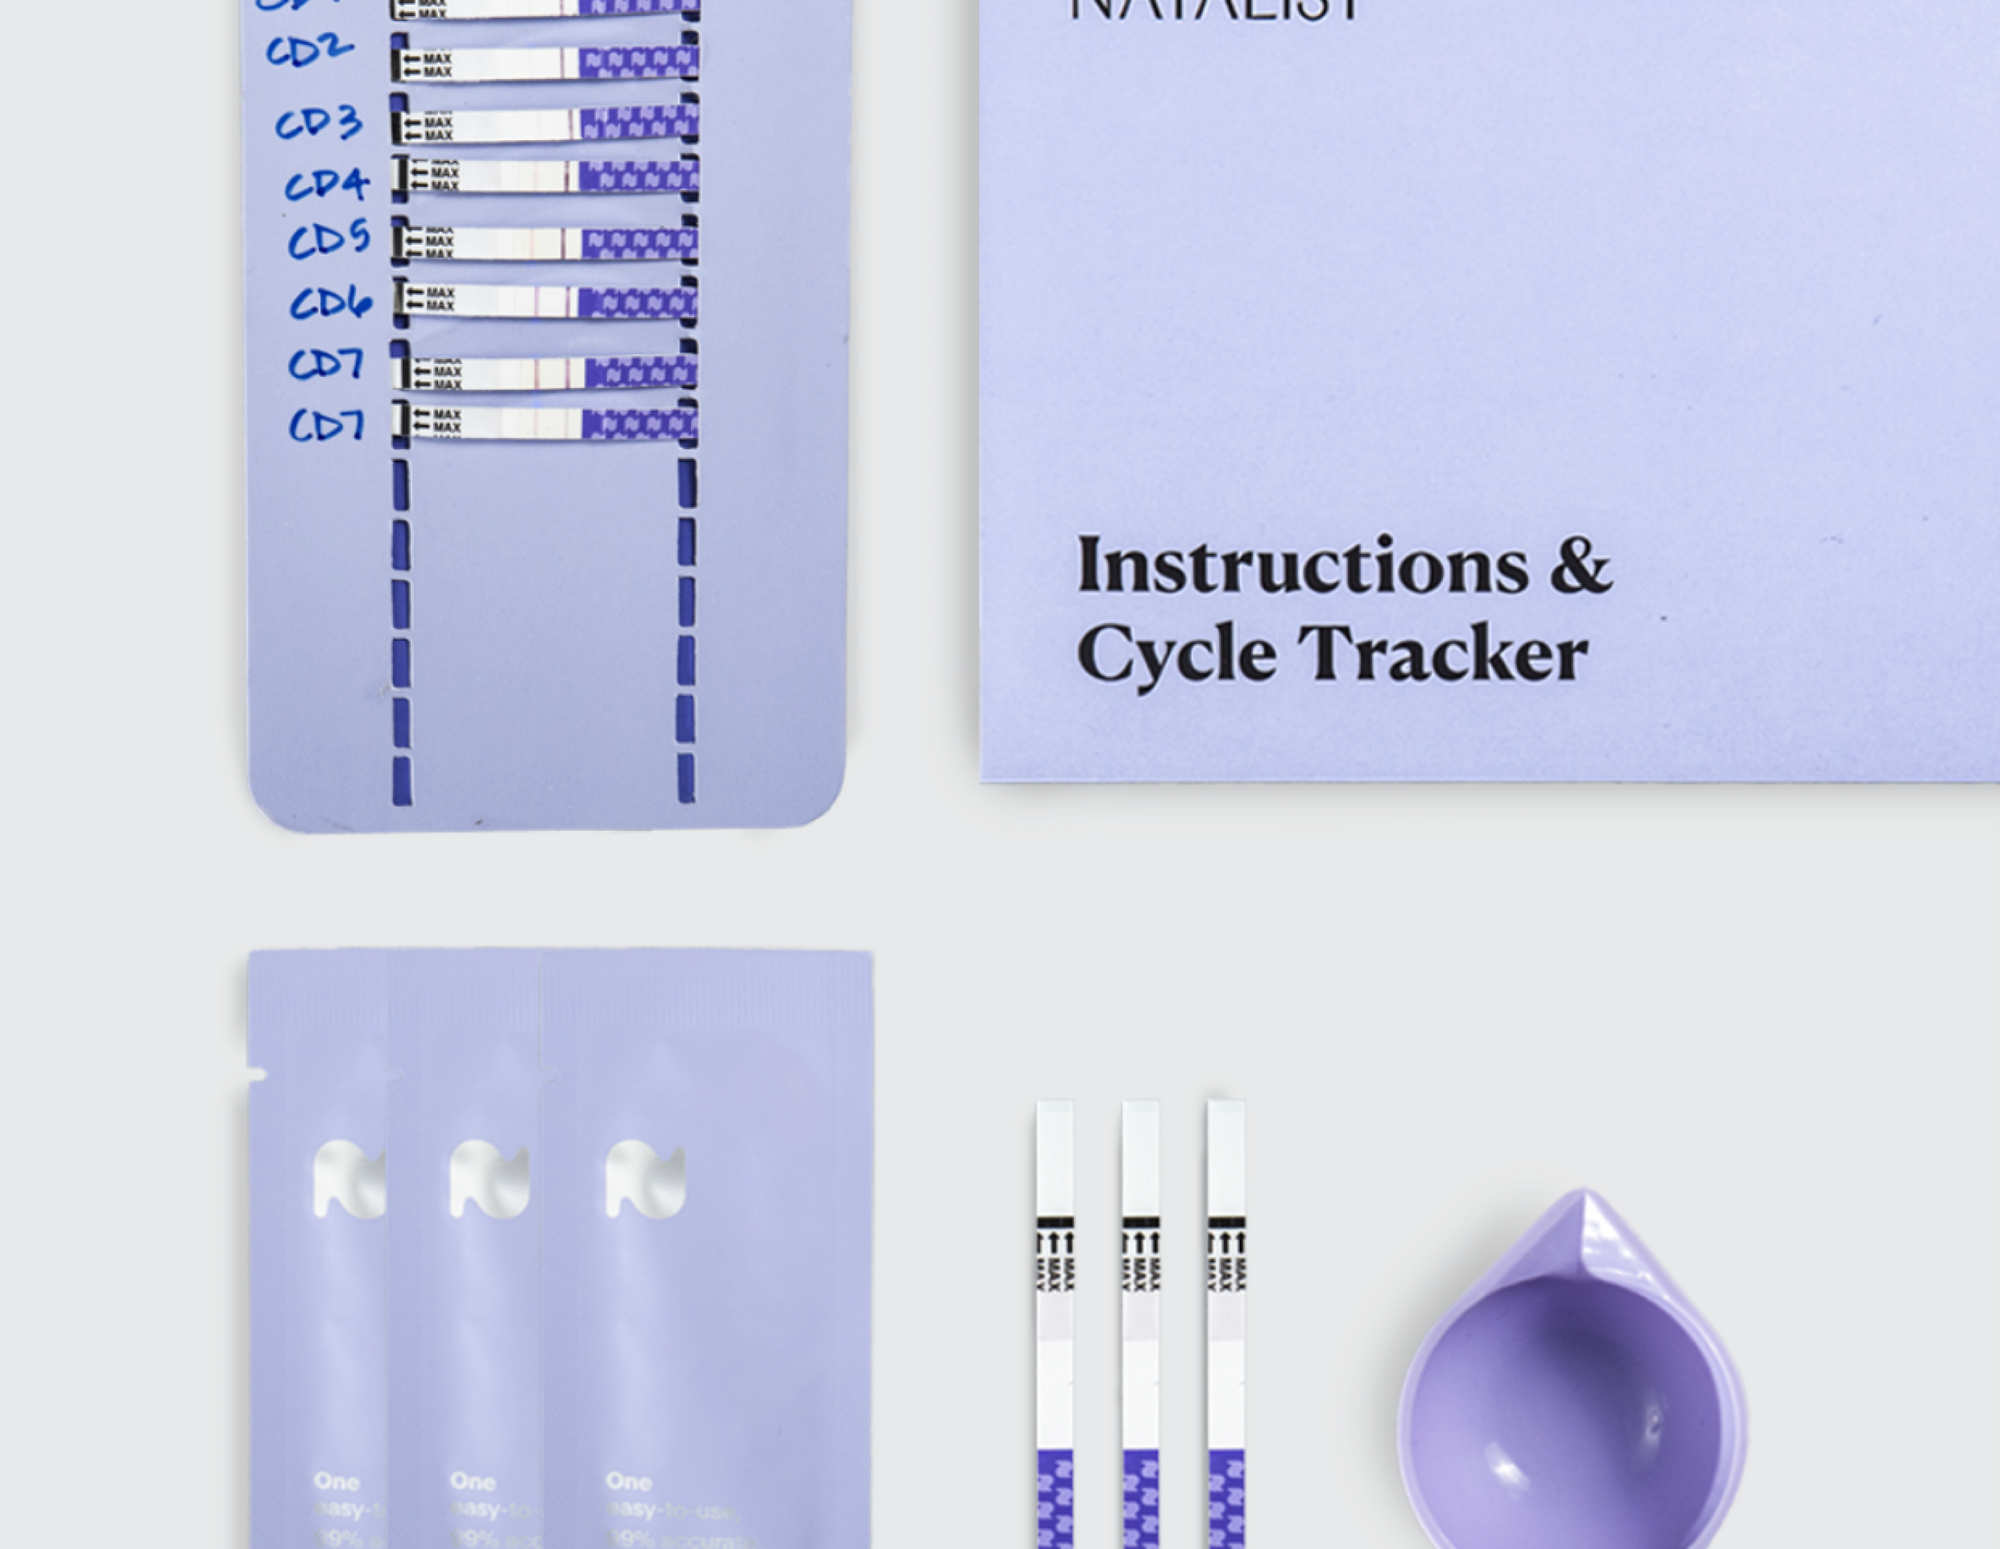 Find out when you ovulate using this fertile window ovulation estimator.  Get pregnant and conceive a baby.